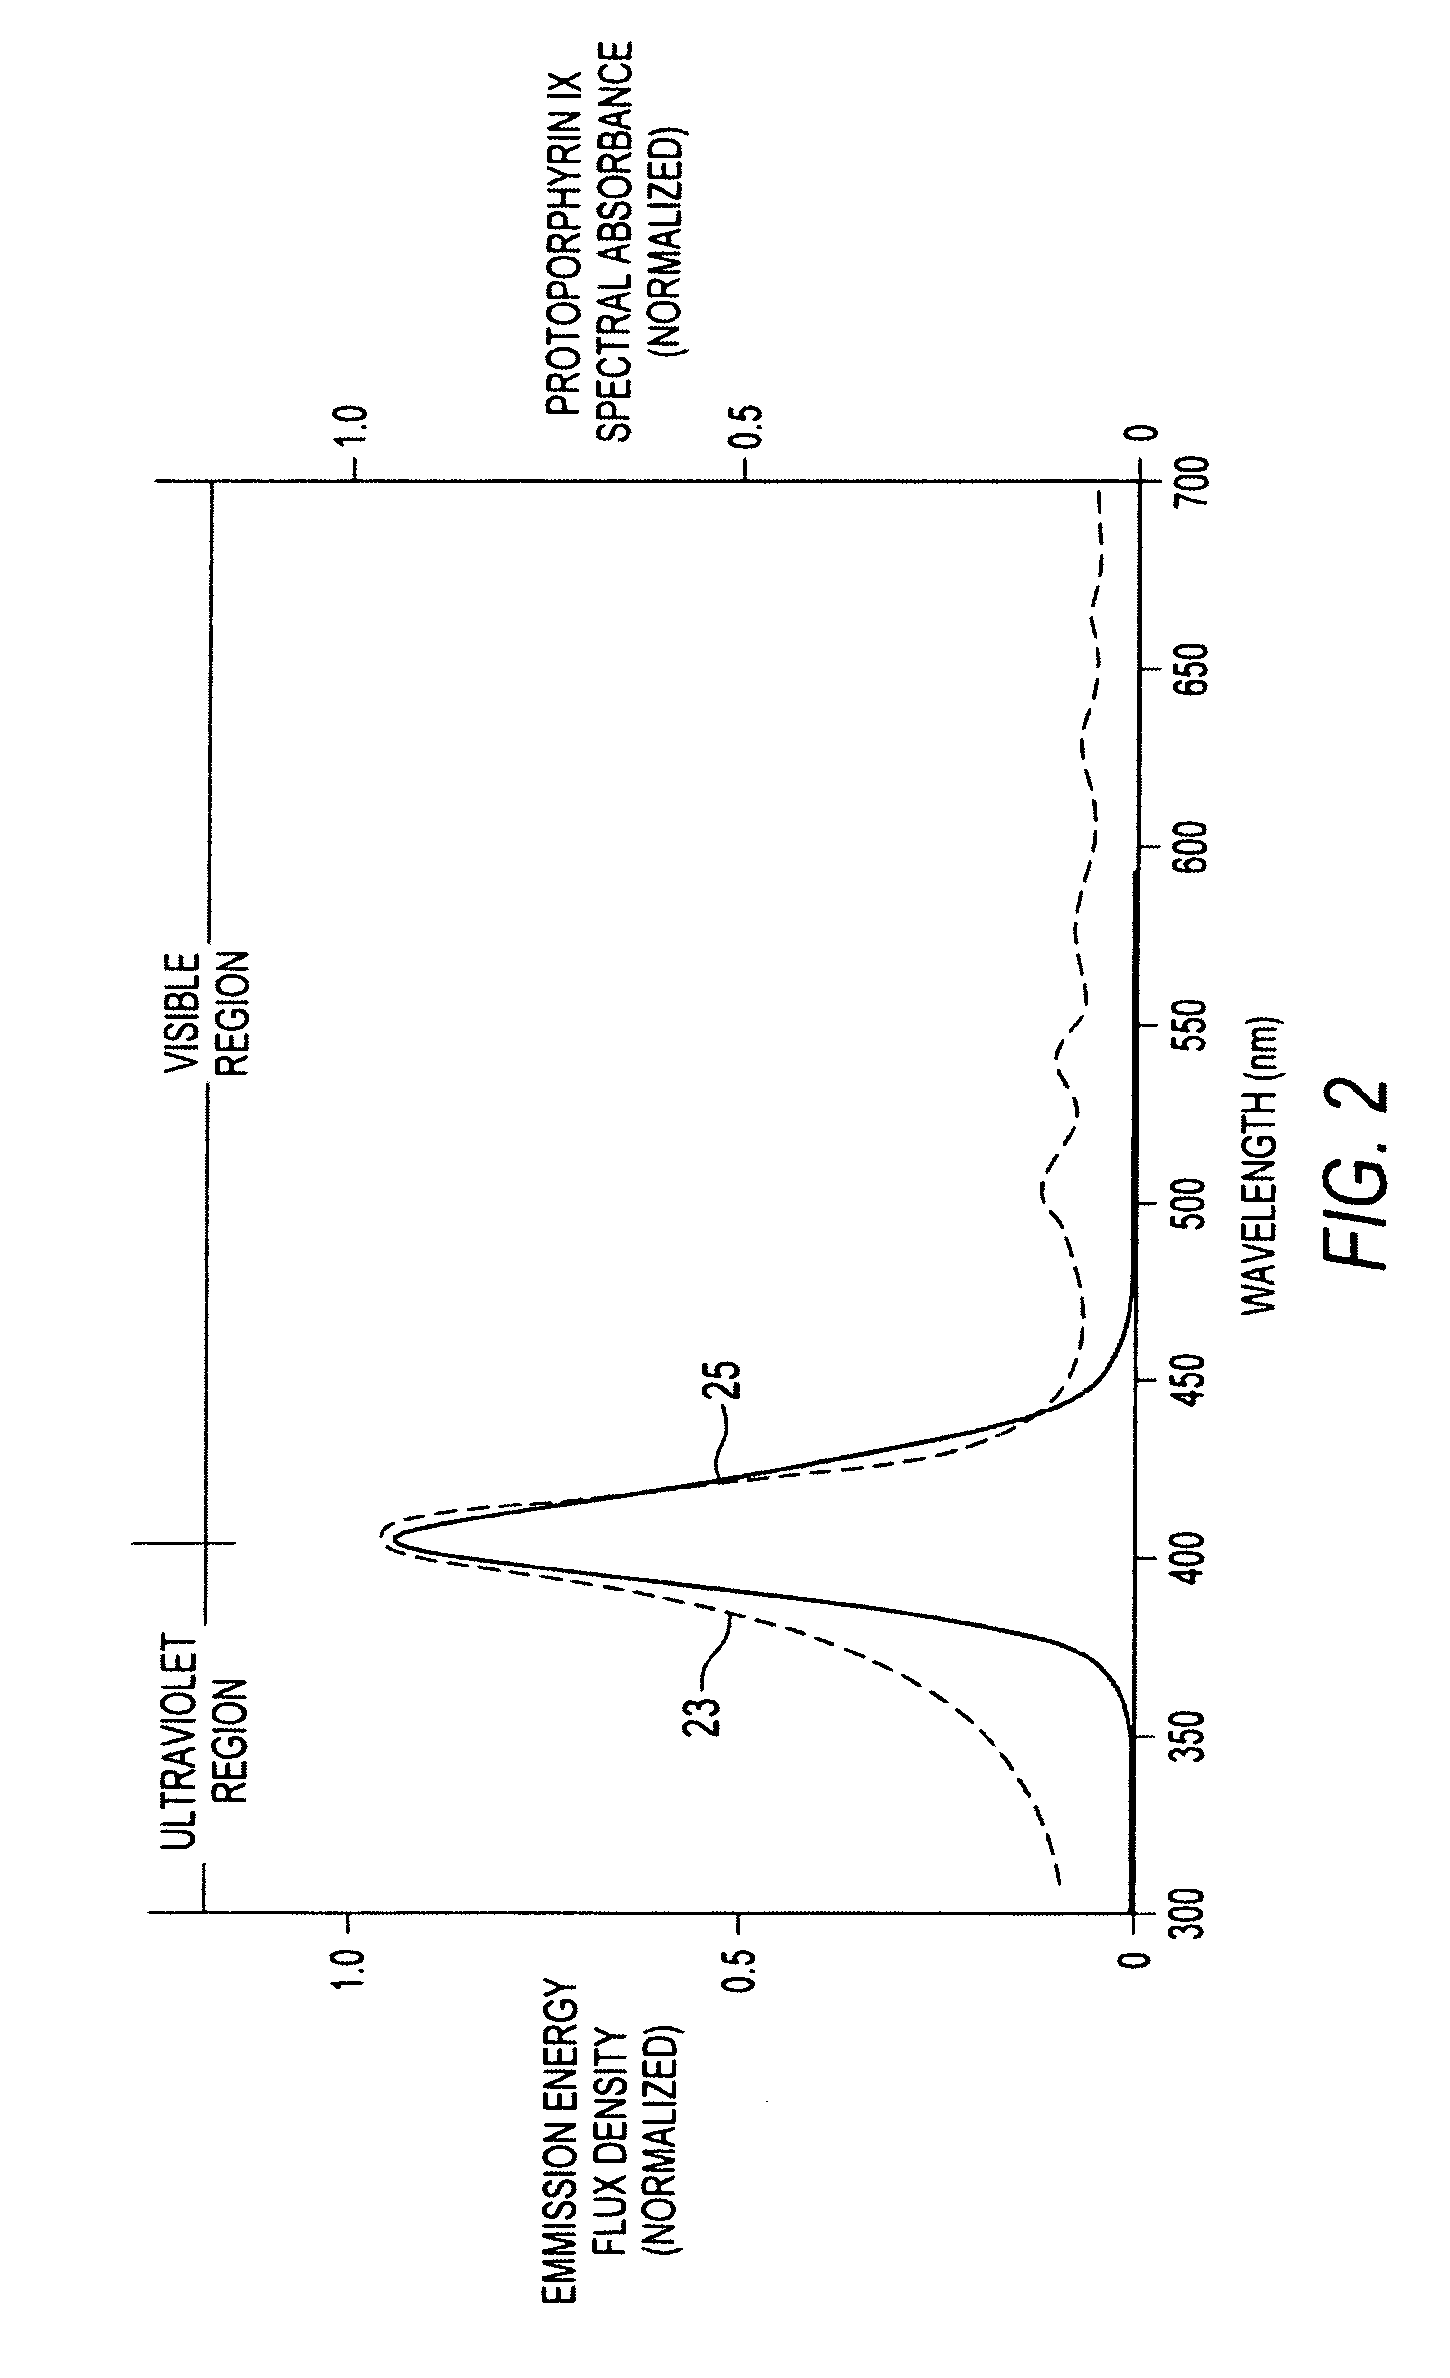 System for treatment of skin conditions using at least one narrow band light source in a skin brush having an oscillating brushhead